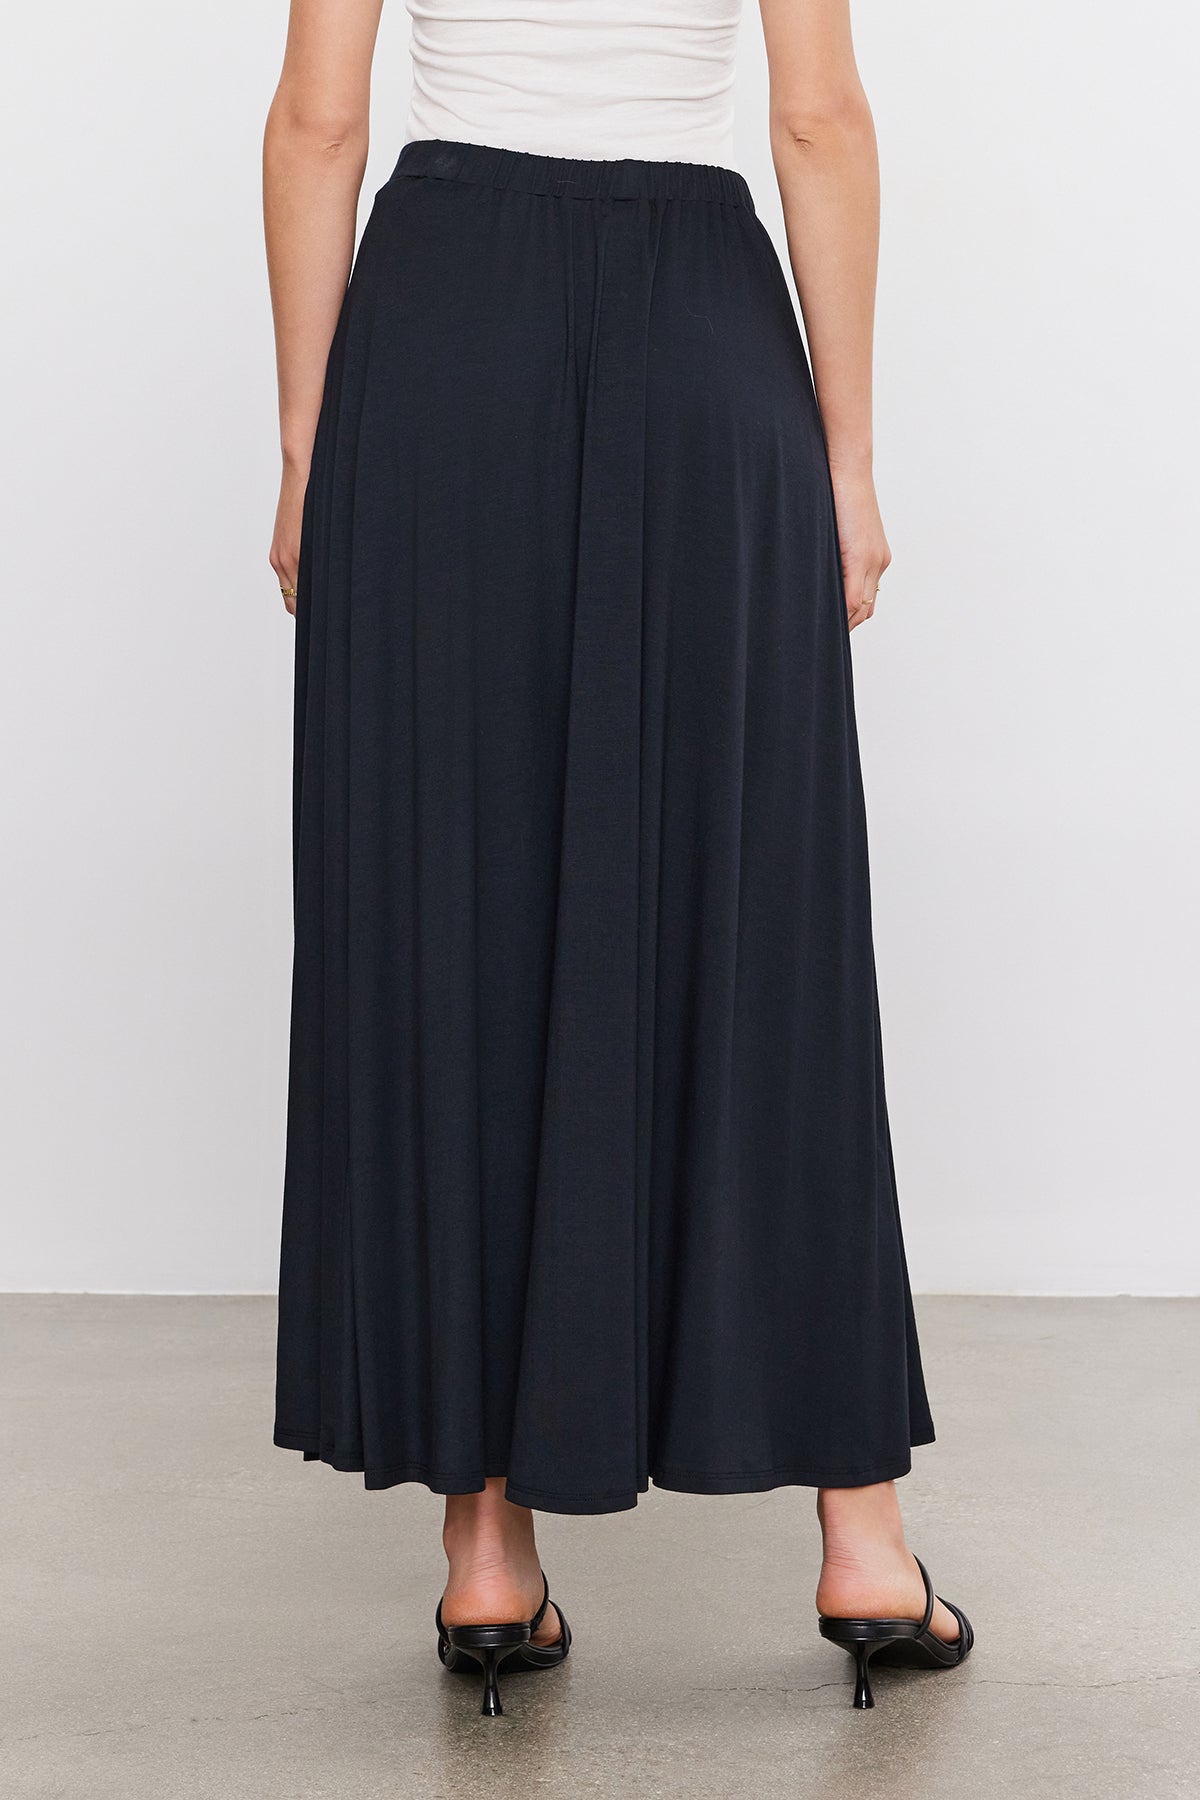 The back view of a woman wearing a Velvet by Graham & Spencer Malaya Maxi Skirt in an A-line silhouette.-35660950241473